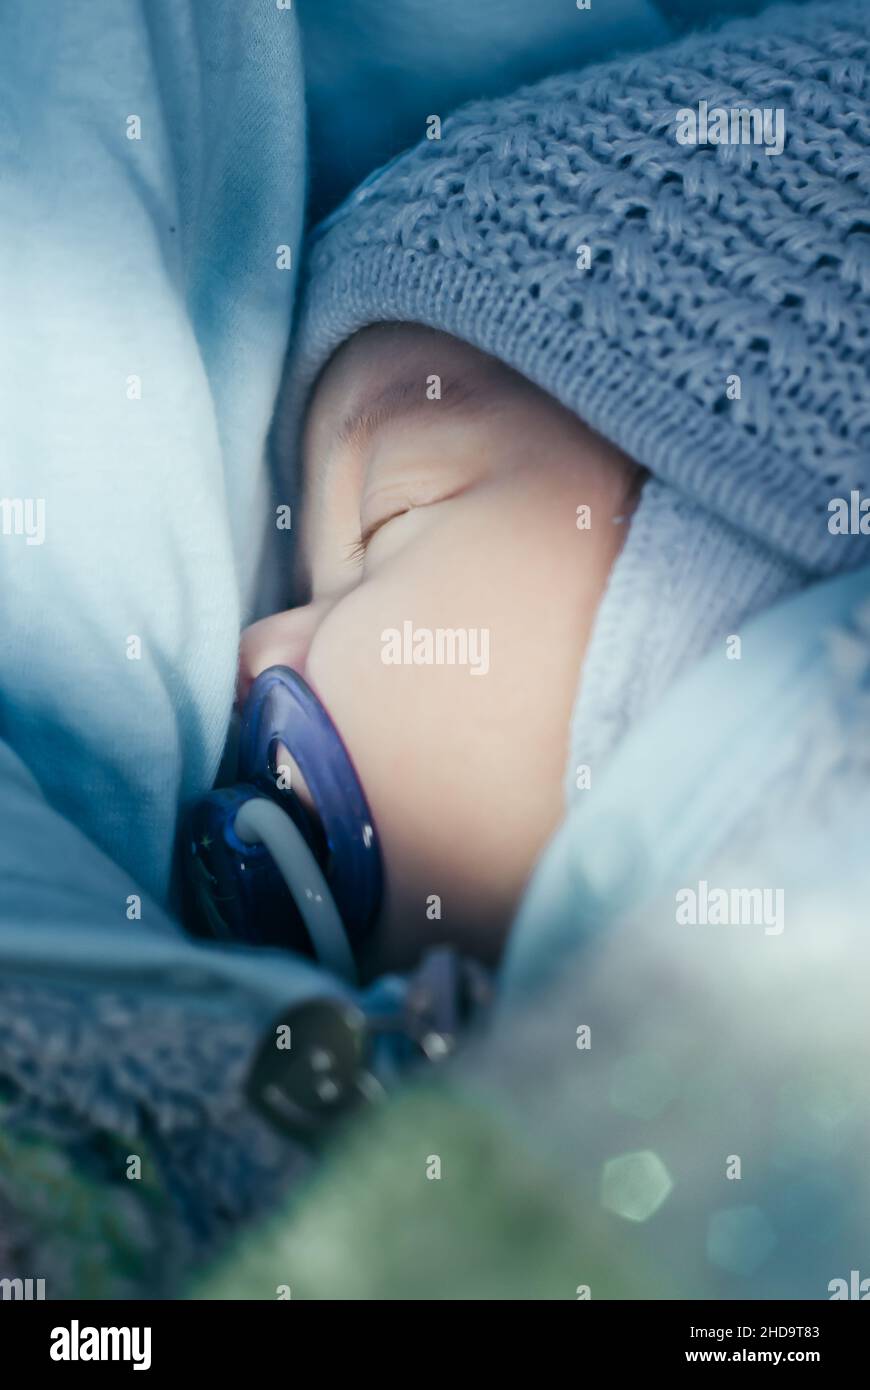 close-up portrait of sleeping baby with pacifier Stock Photo